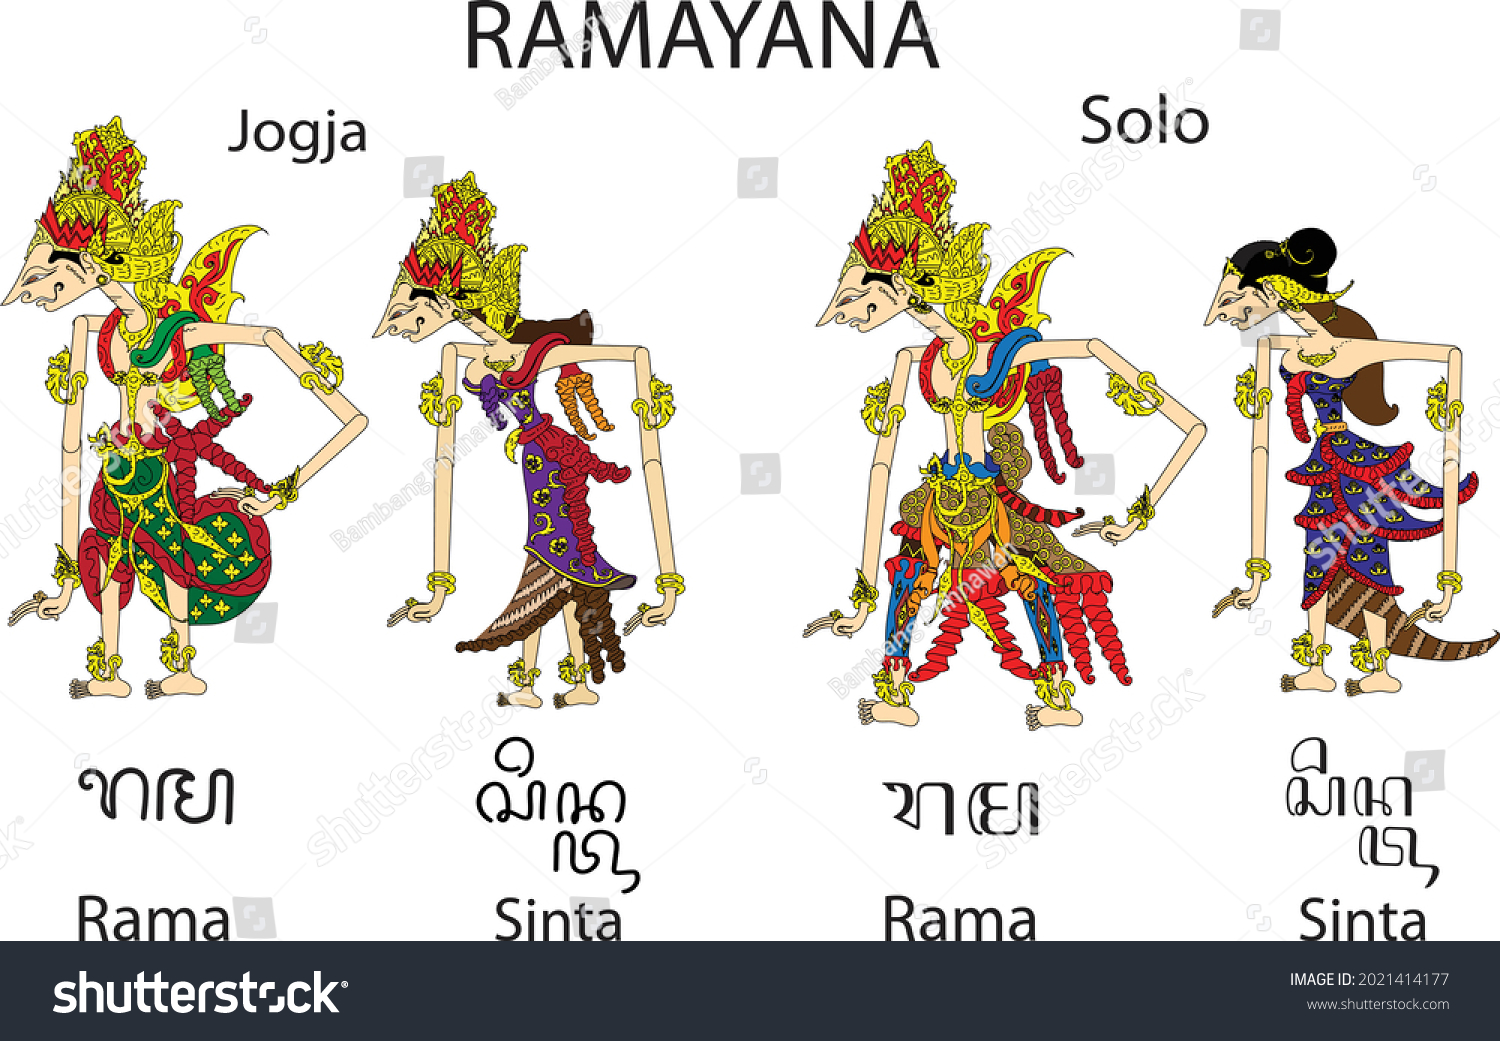  The image shows four Javanese wayang kulit puppets, which are the characters of Rama, Sinta, Rama, and Sinta, from the Ramayana epic.